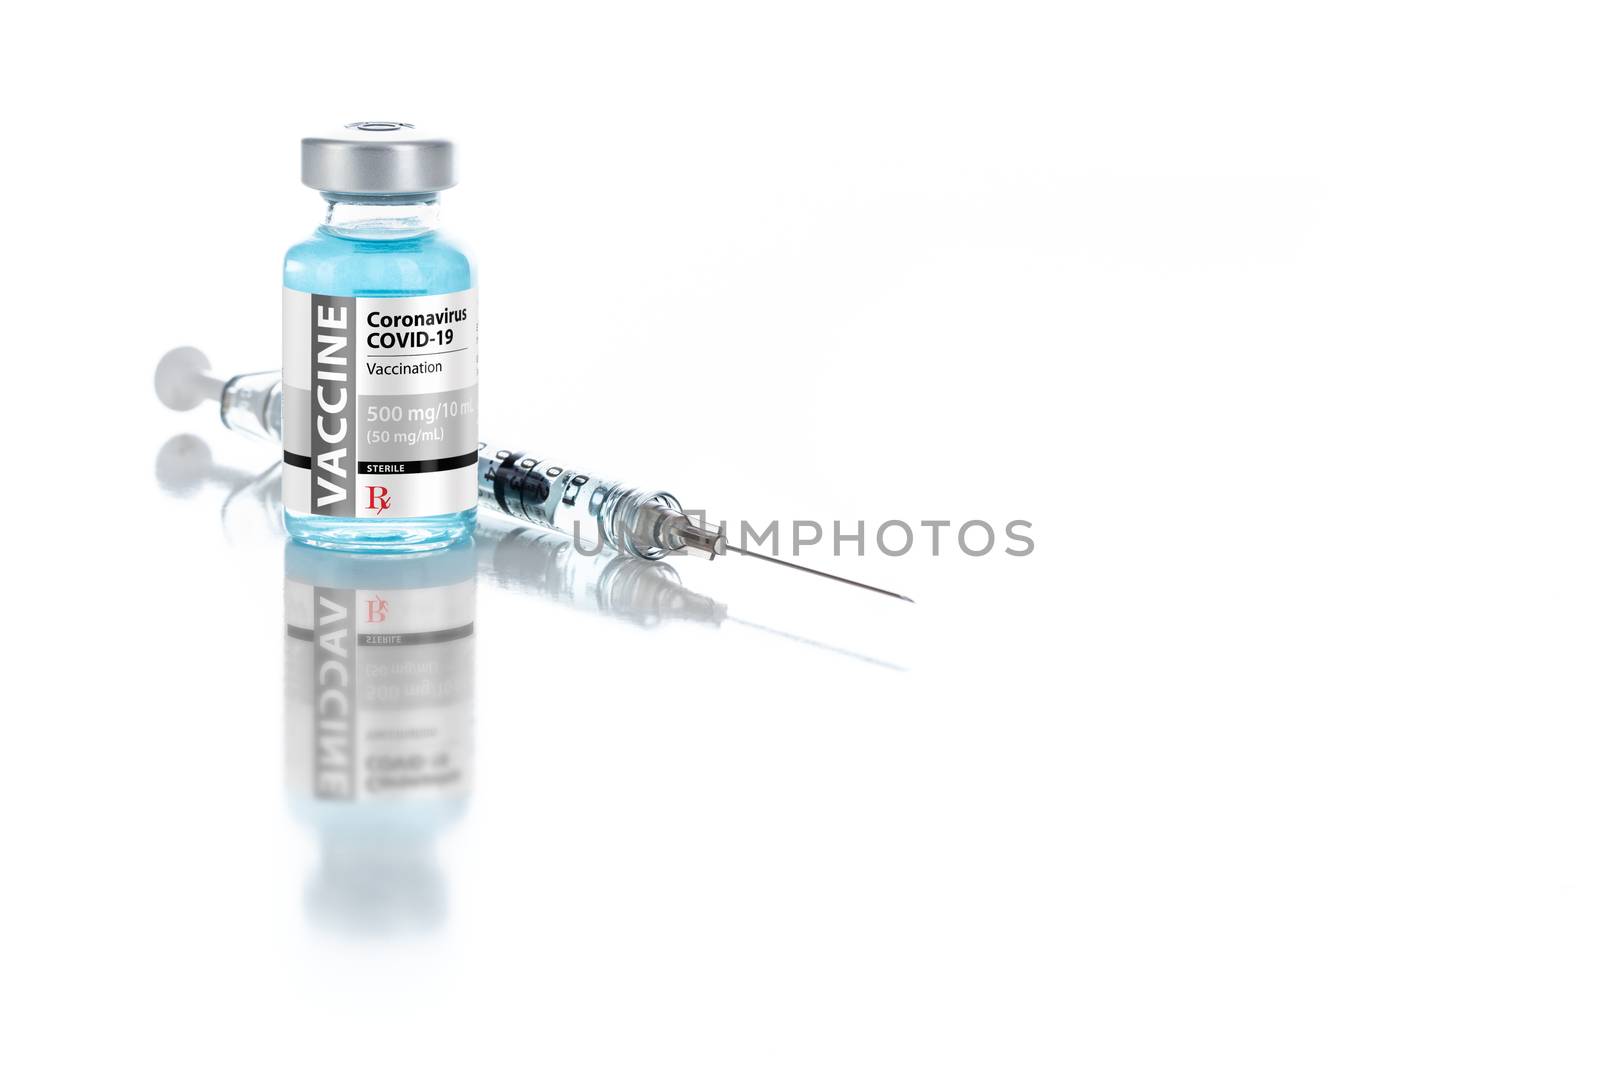 Coronavirus COVID-19 Vaccine Vial and Syringe On Reflective Whit by Feverpitched